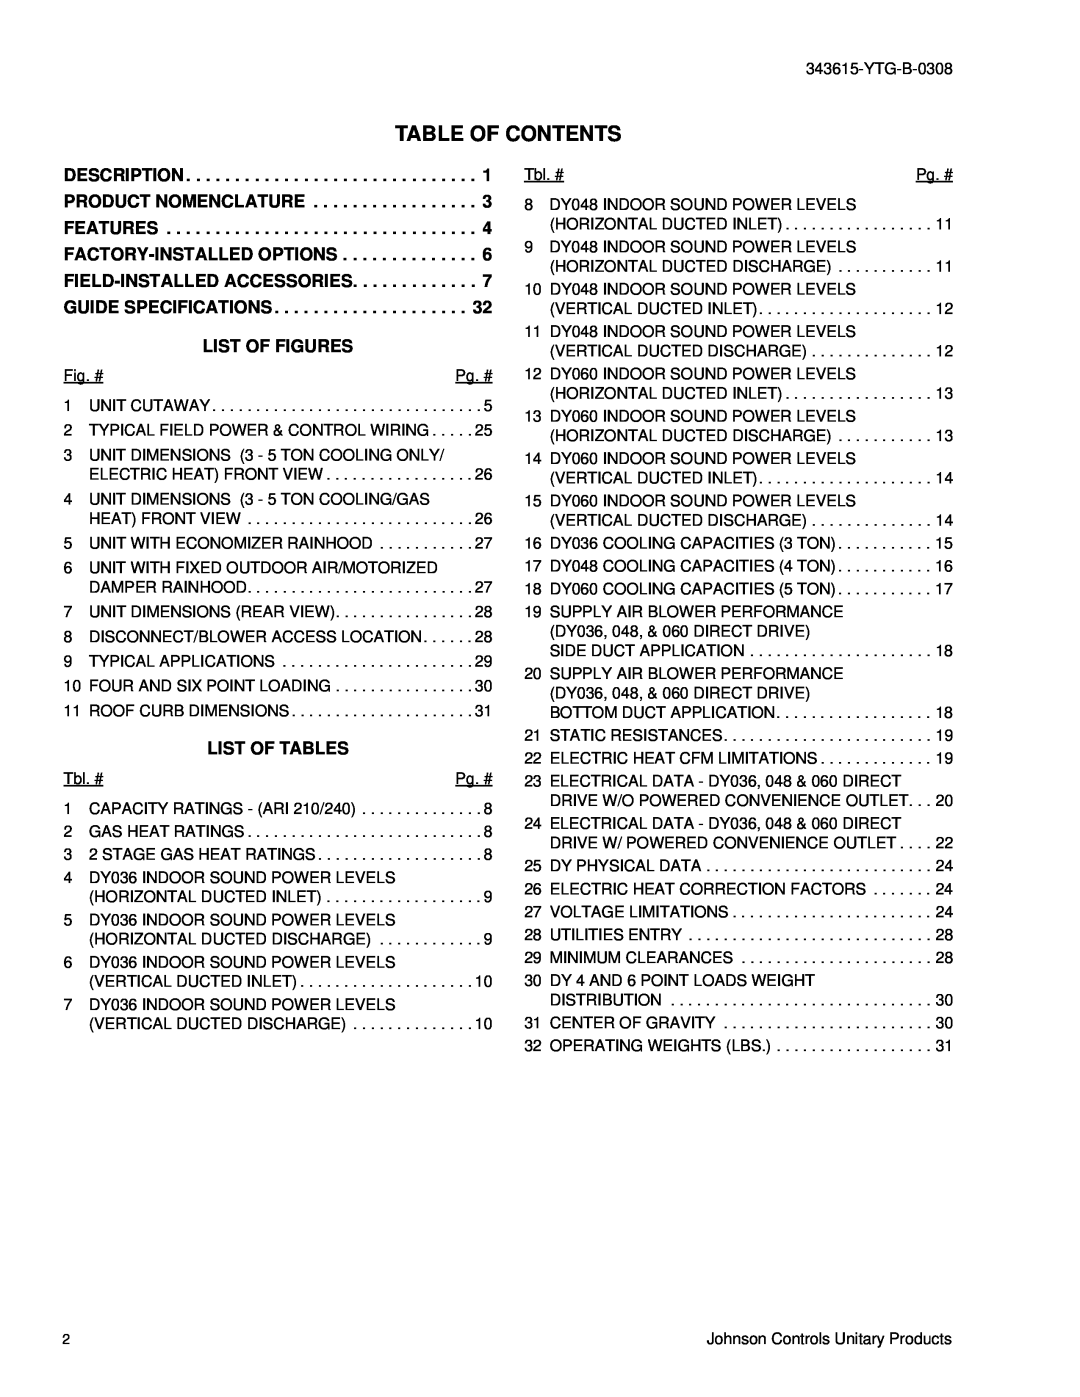 York DY 060, DY 048 warranty Table Of Contents, List Of Figures, List Of Tables 